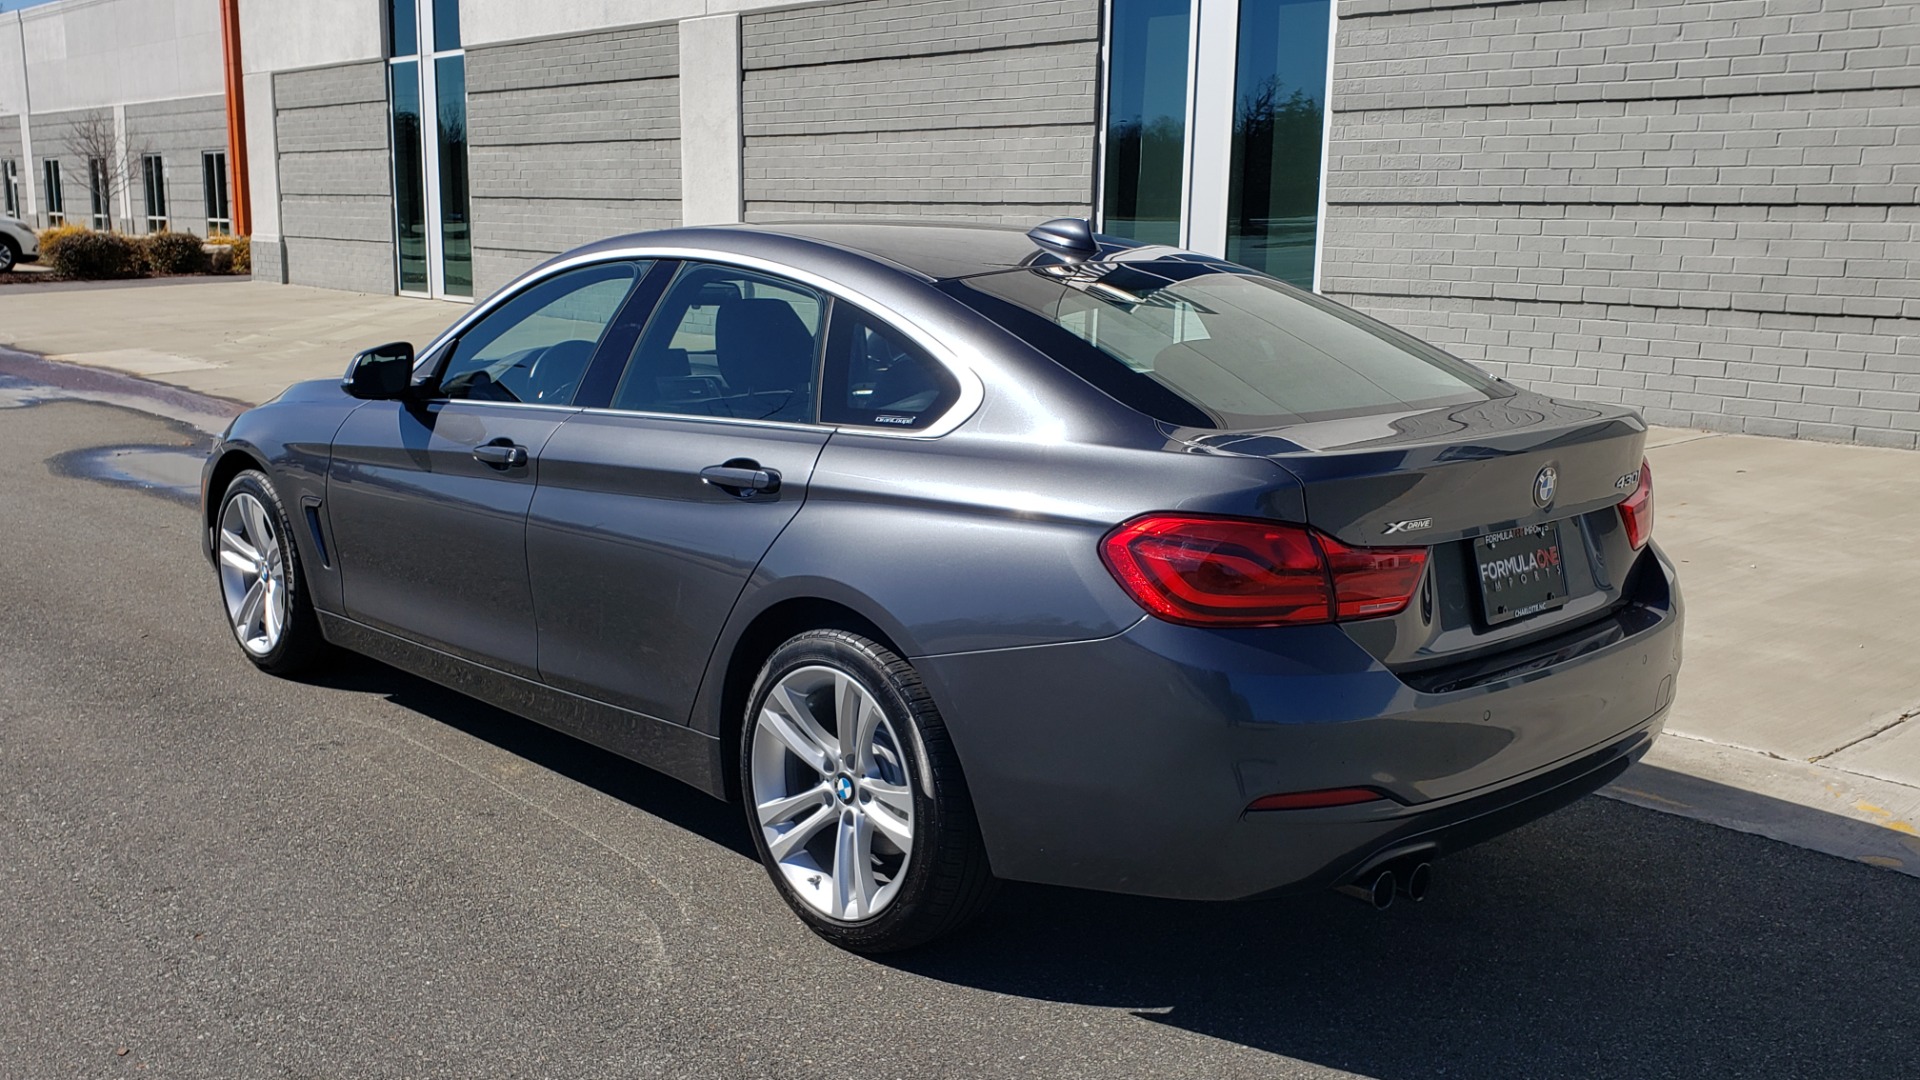 Used 2018 BMW 4 SERIES 430IXDRIVE / PREMIUM / NAV / SUNROOF / ESSENTIALS PKG for sale Sold at Formula Imports in Charlotte NC 28227 4